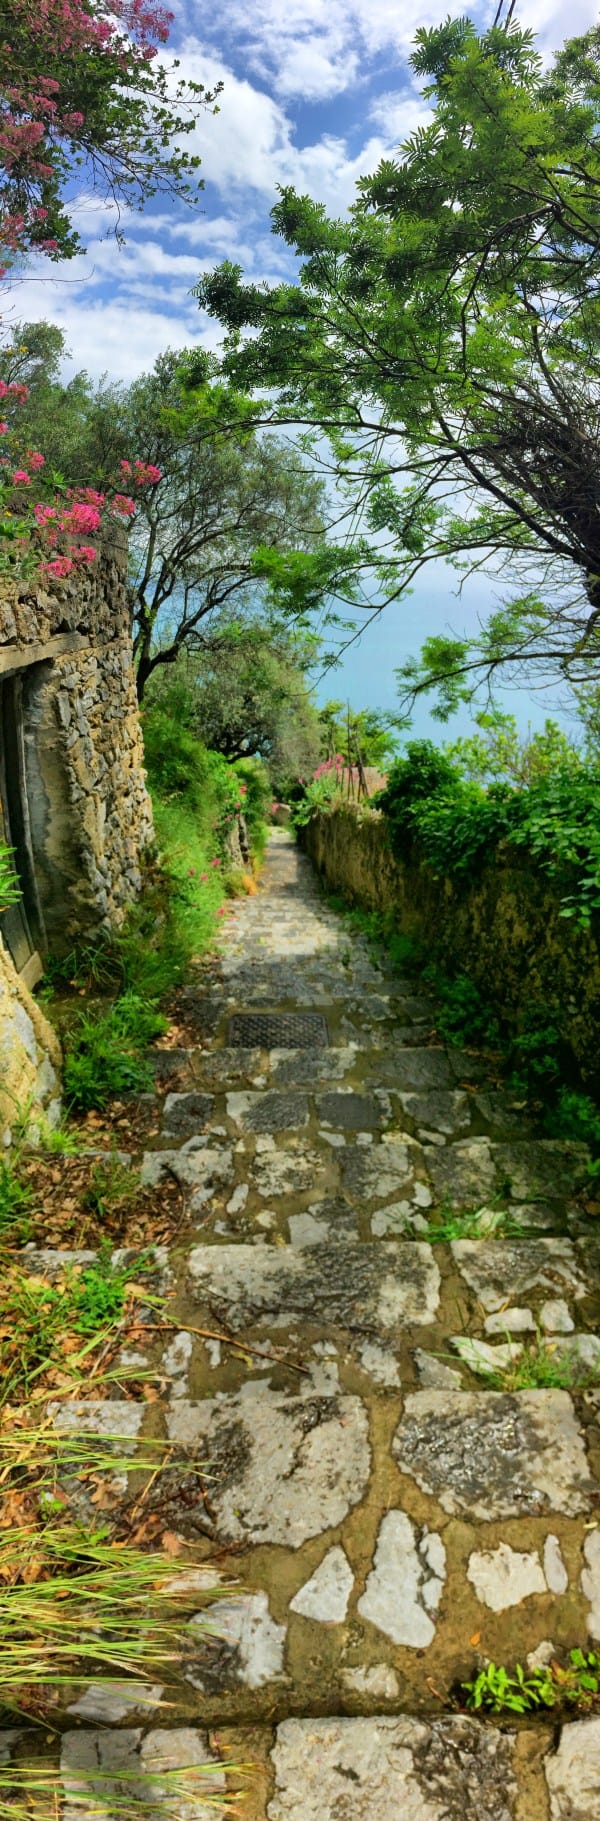 Hiking on the Amalfi Coast Stage 3 typical stairway with thousands of steps